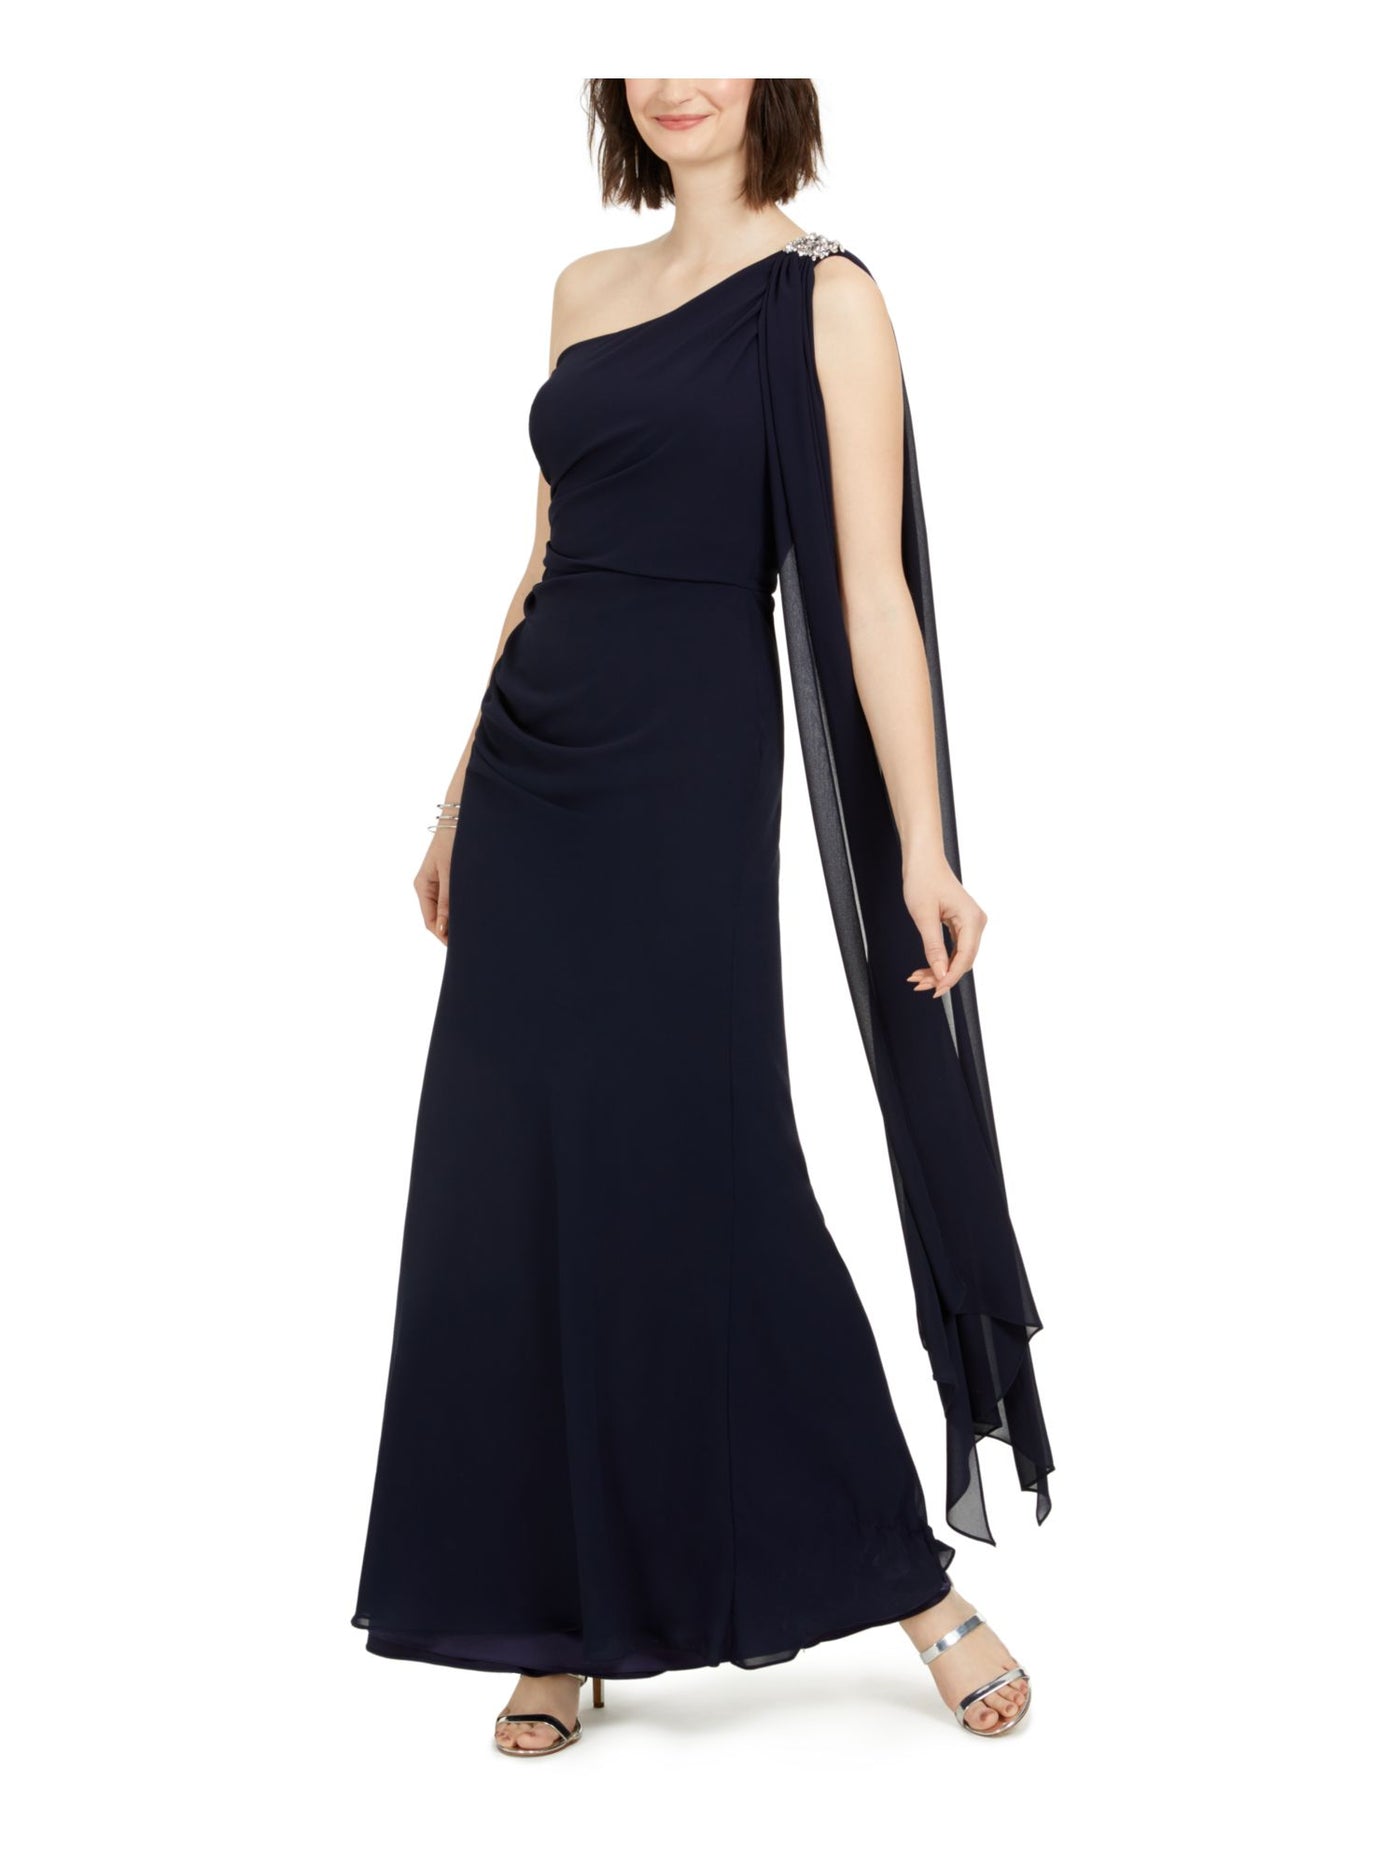 VINCE CAMUTO Womens Stretch Embellished Zippered One-shoulder Chiffon Gown Sleeveless Asymmetrical Neckline Maxi Formal Dress